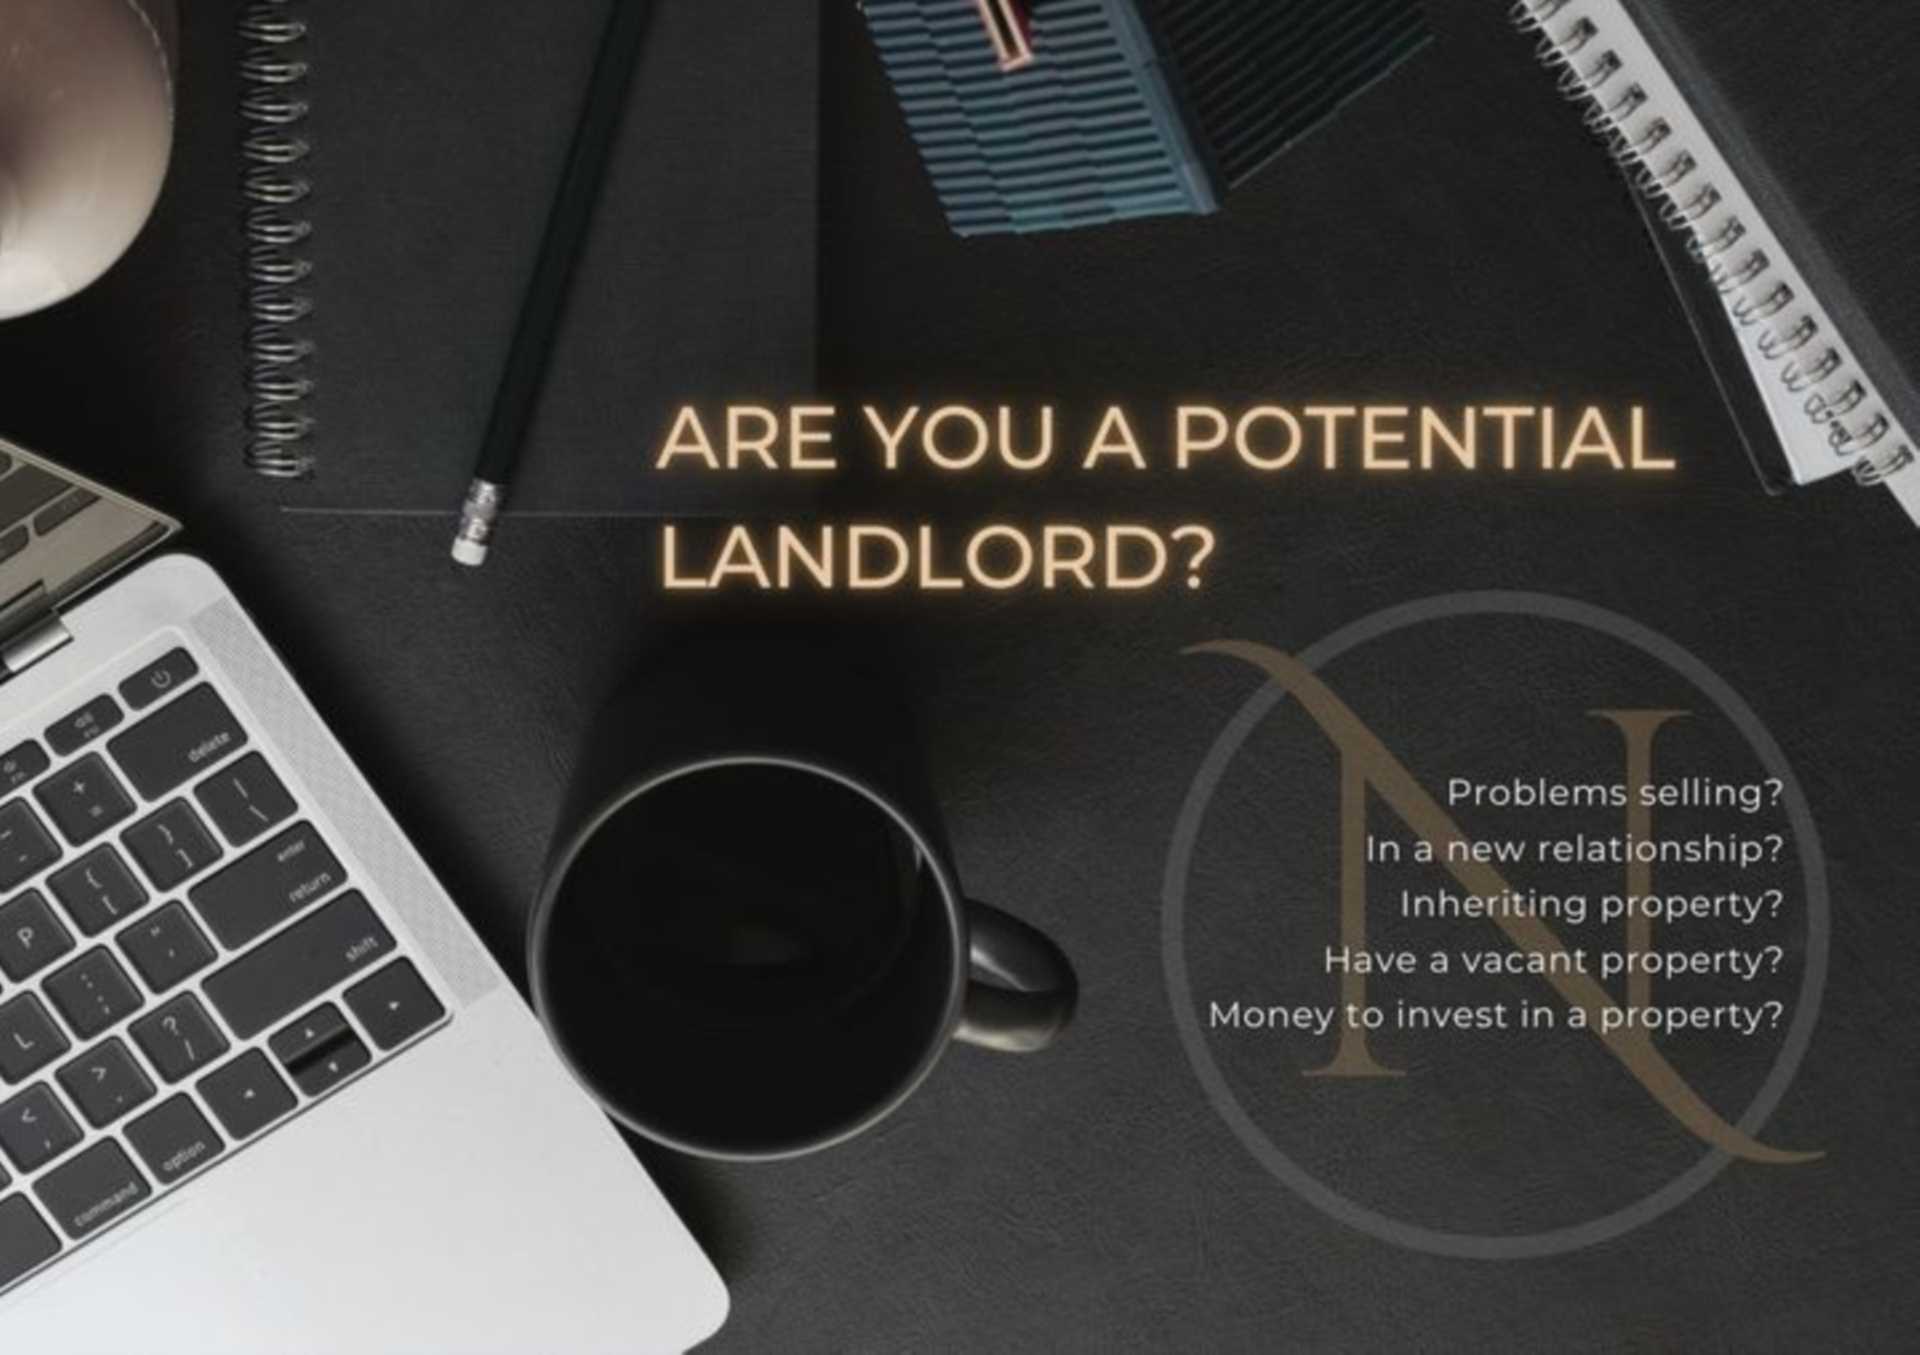 Are you a potential landlord?